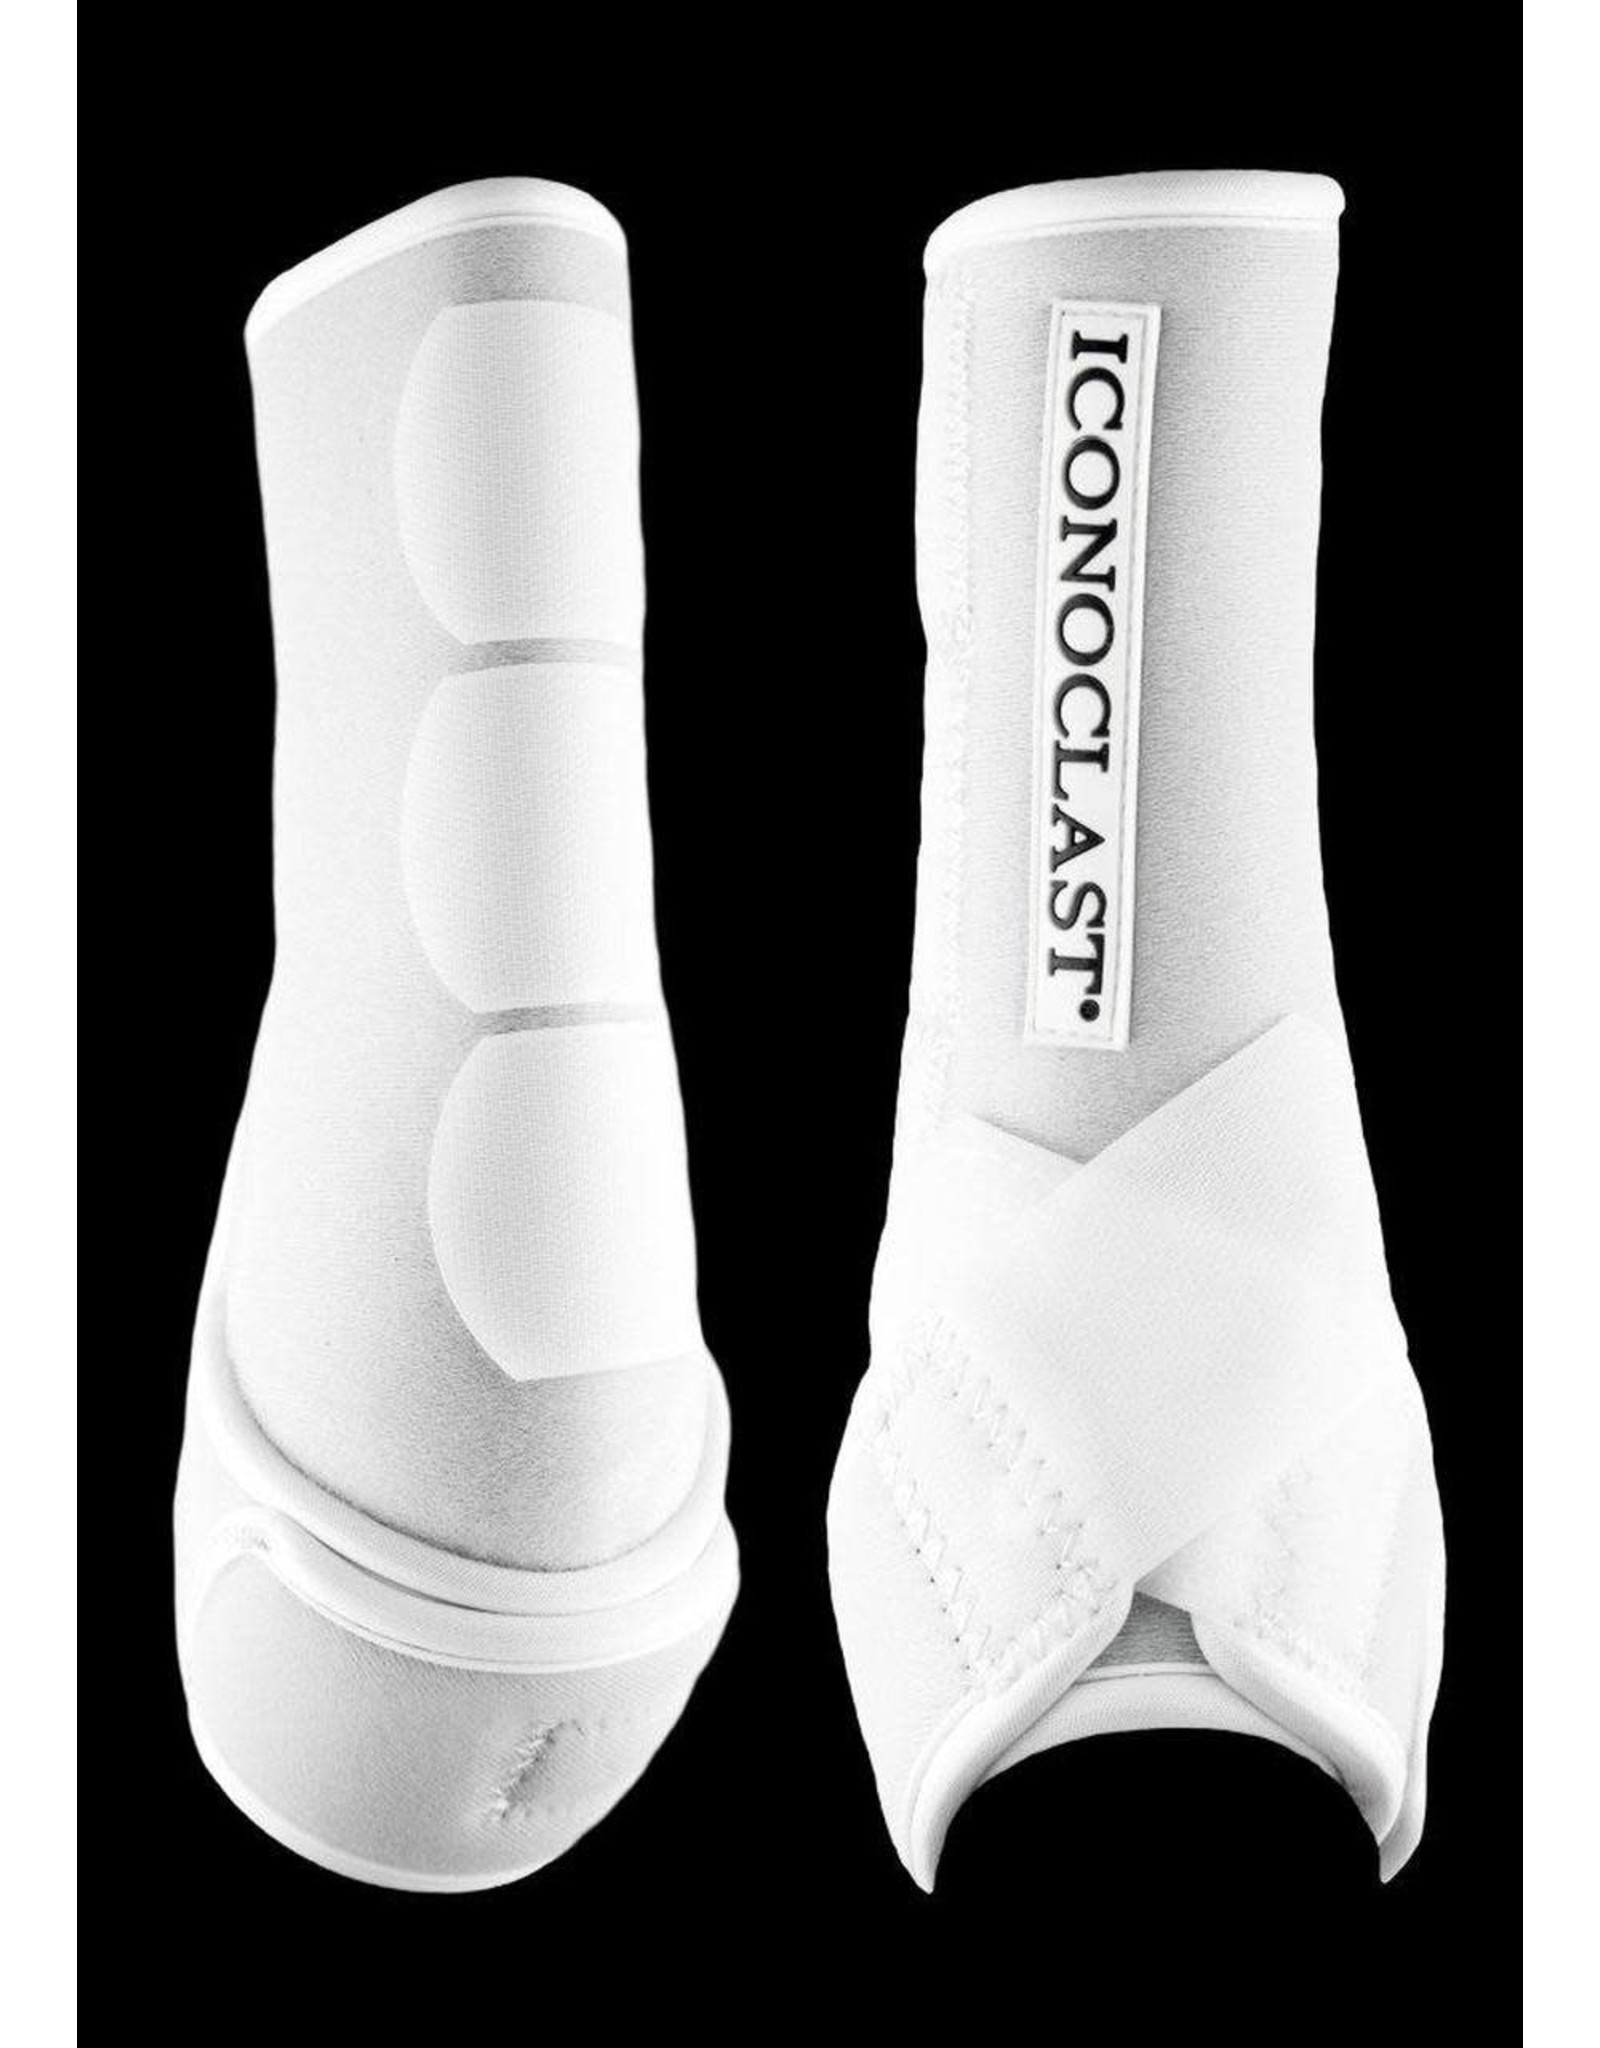 Iconoclast Orthopedic Support Boots - Hind - Medium XTall -  WHITE - 2360-M-W